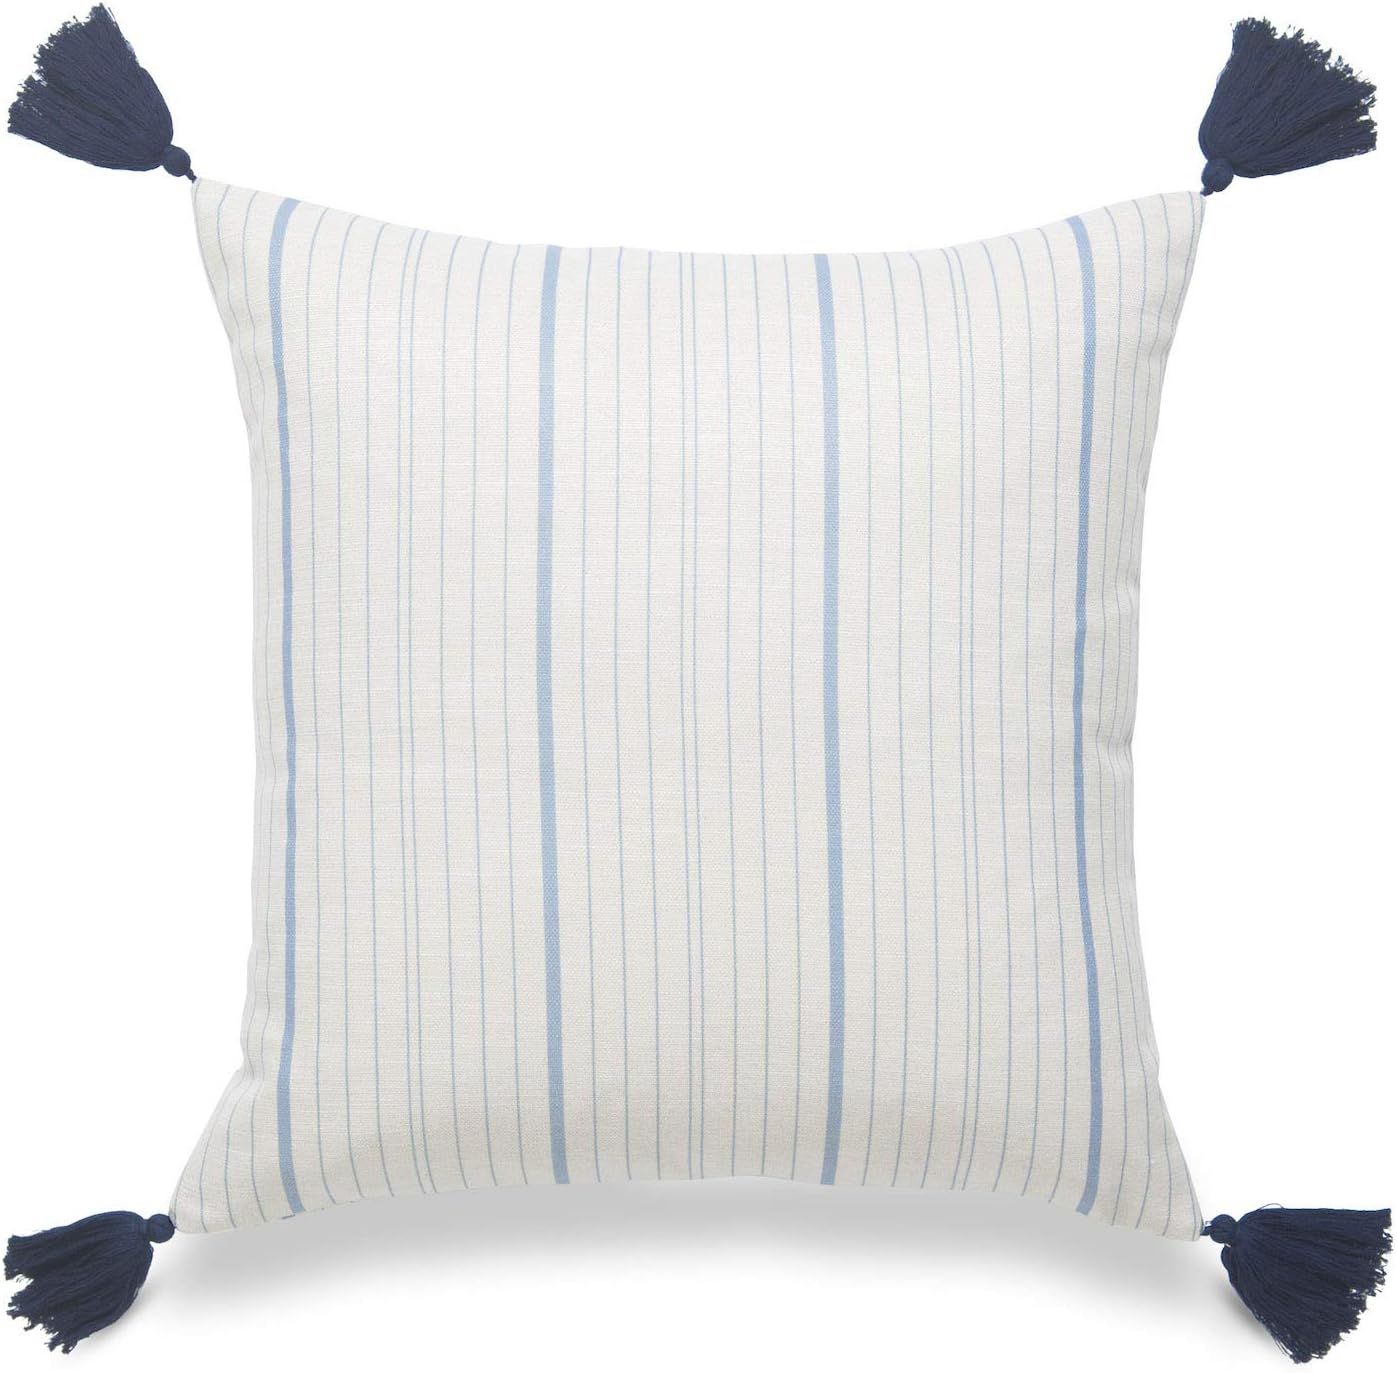 Hofdeco Coastal Decorative Throw Pillow Cover ONLY, for Couch, Sofa, or Bed, Sky Blue Stripe Tassel, | Amazon (US)